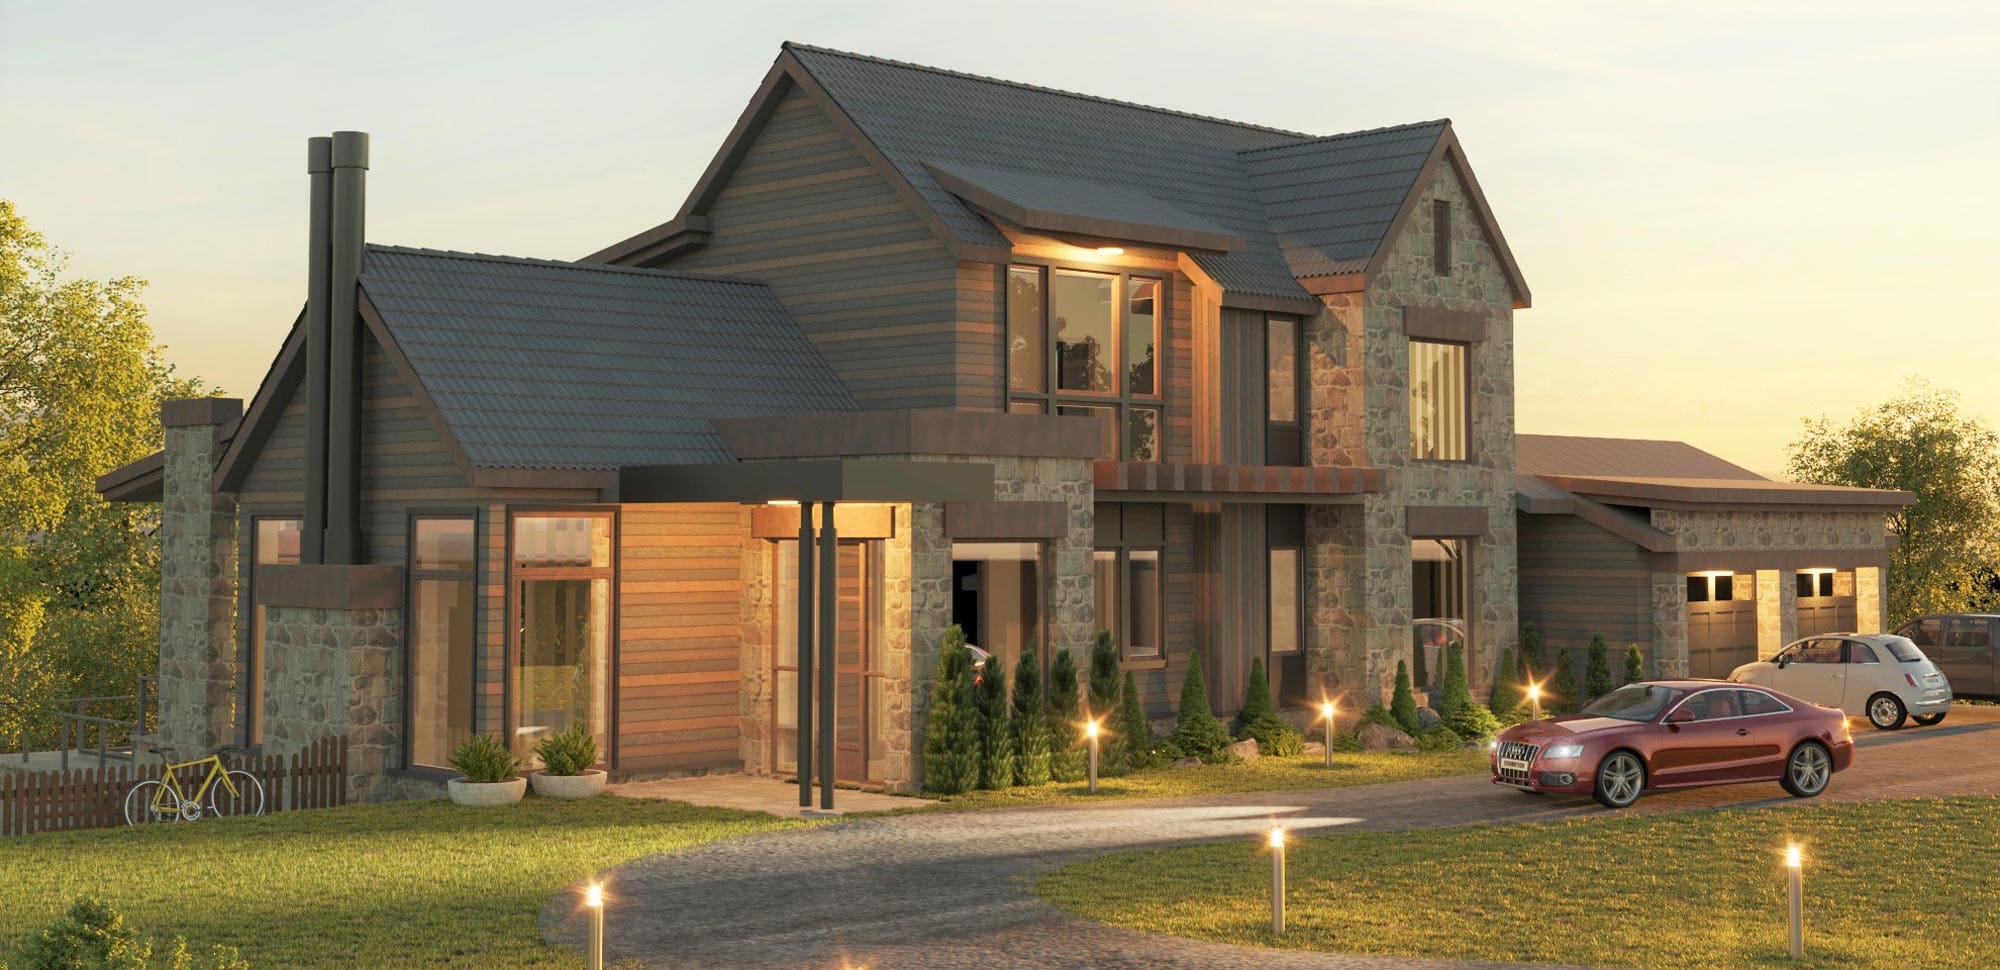 Design Elite architectural innovation in Upstate South Carolina our work Lake residential hero image - Lake Residential